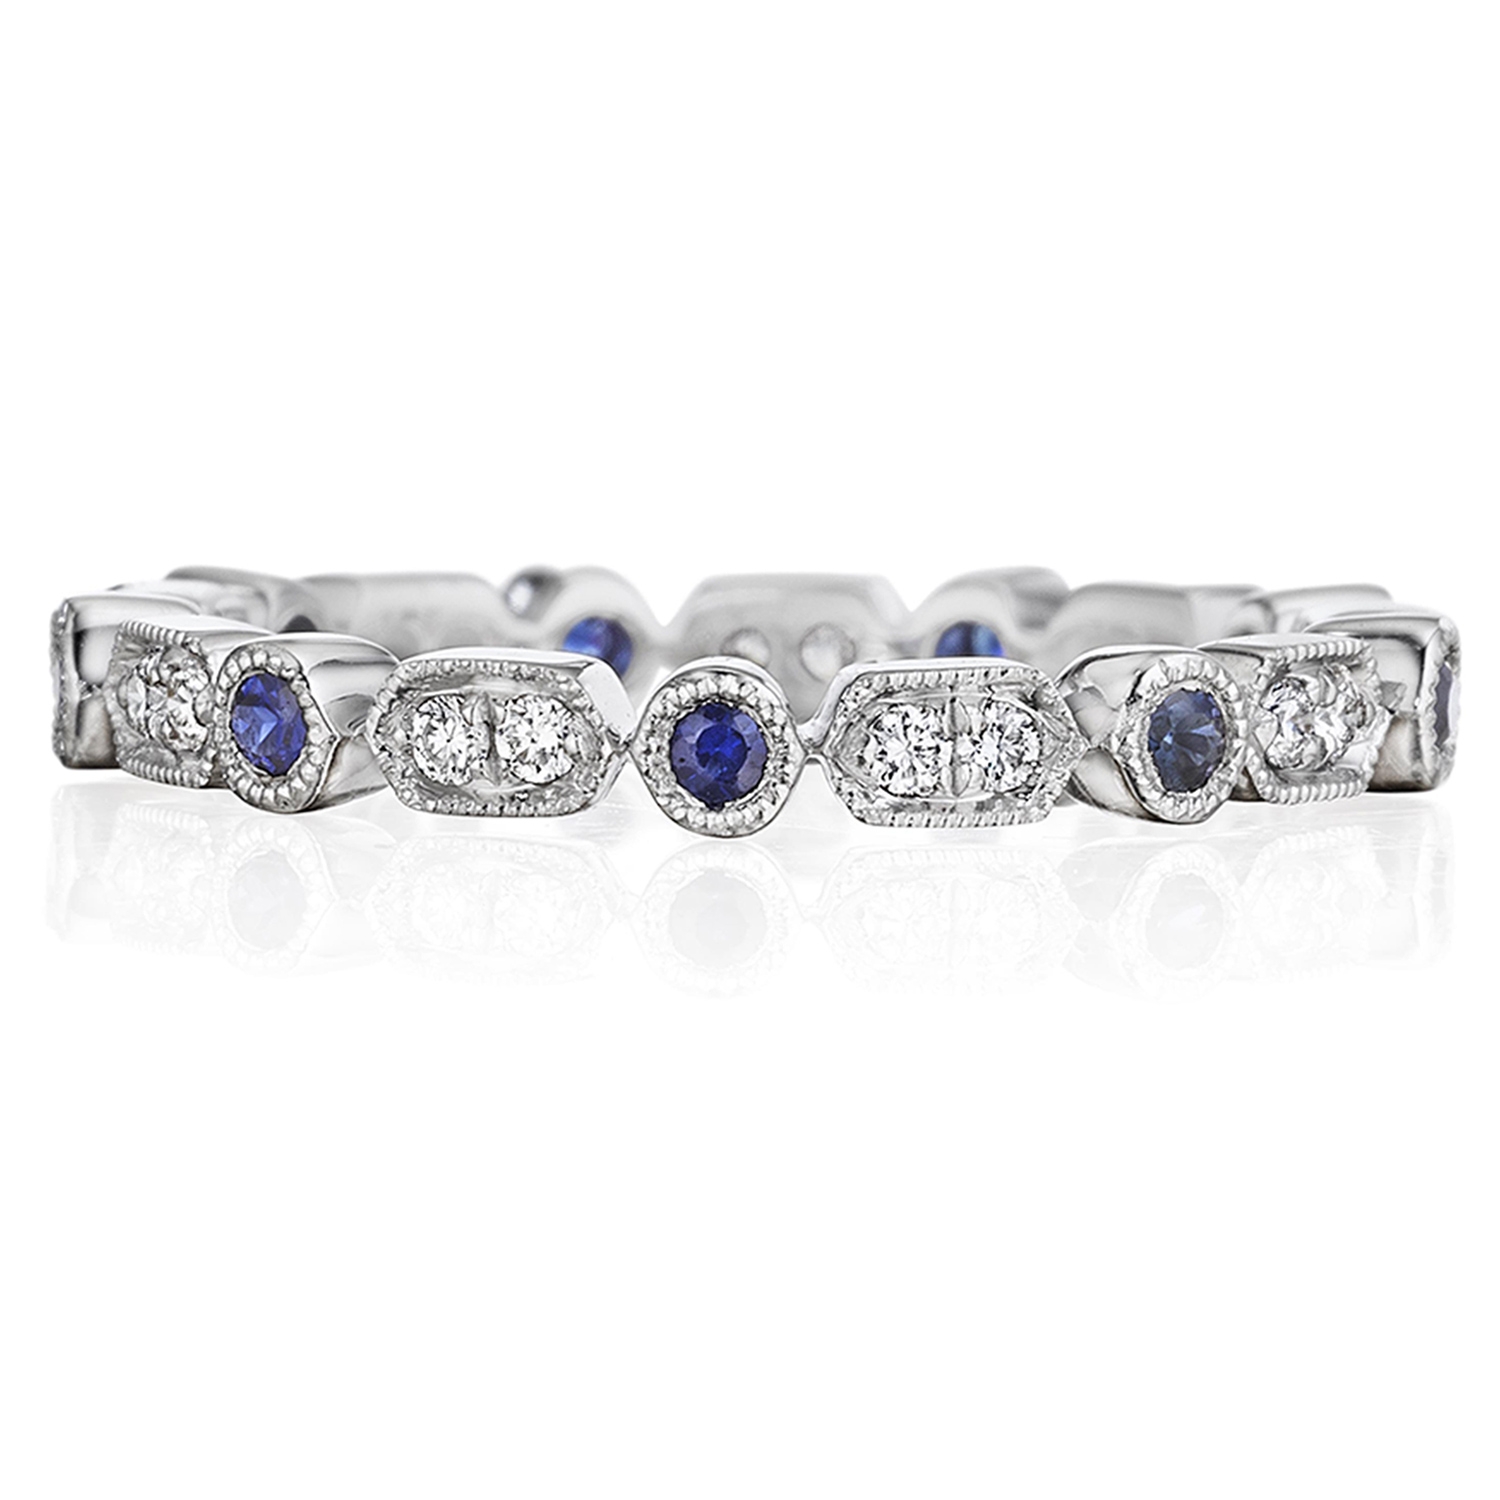 Henri Daussi R43-6 Bead and Bezel Set Diamond and Sapphire Band with Miligrain Detail